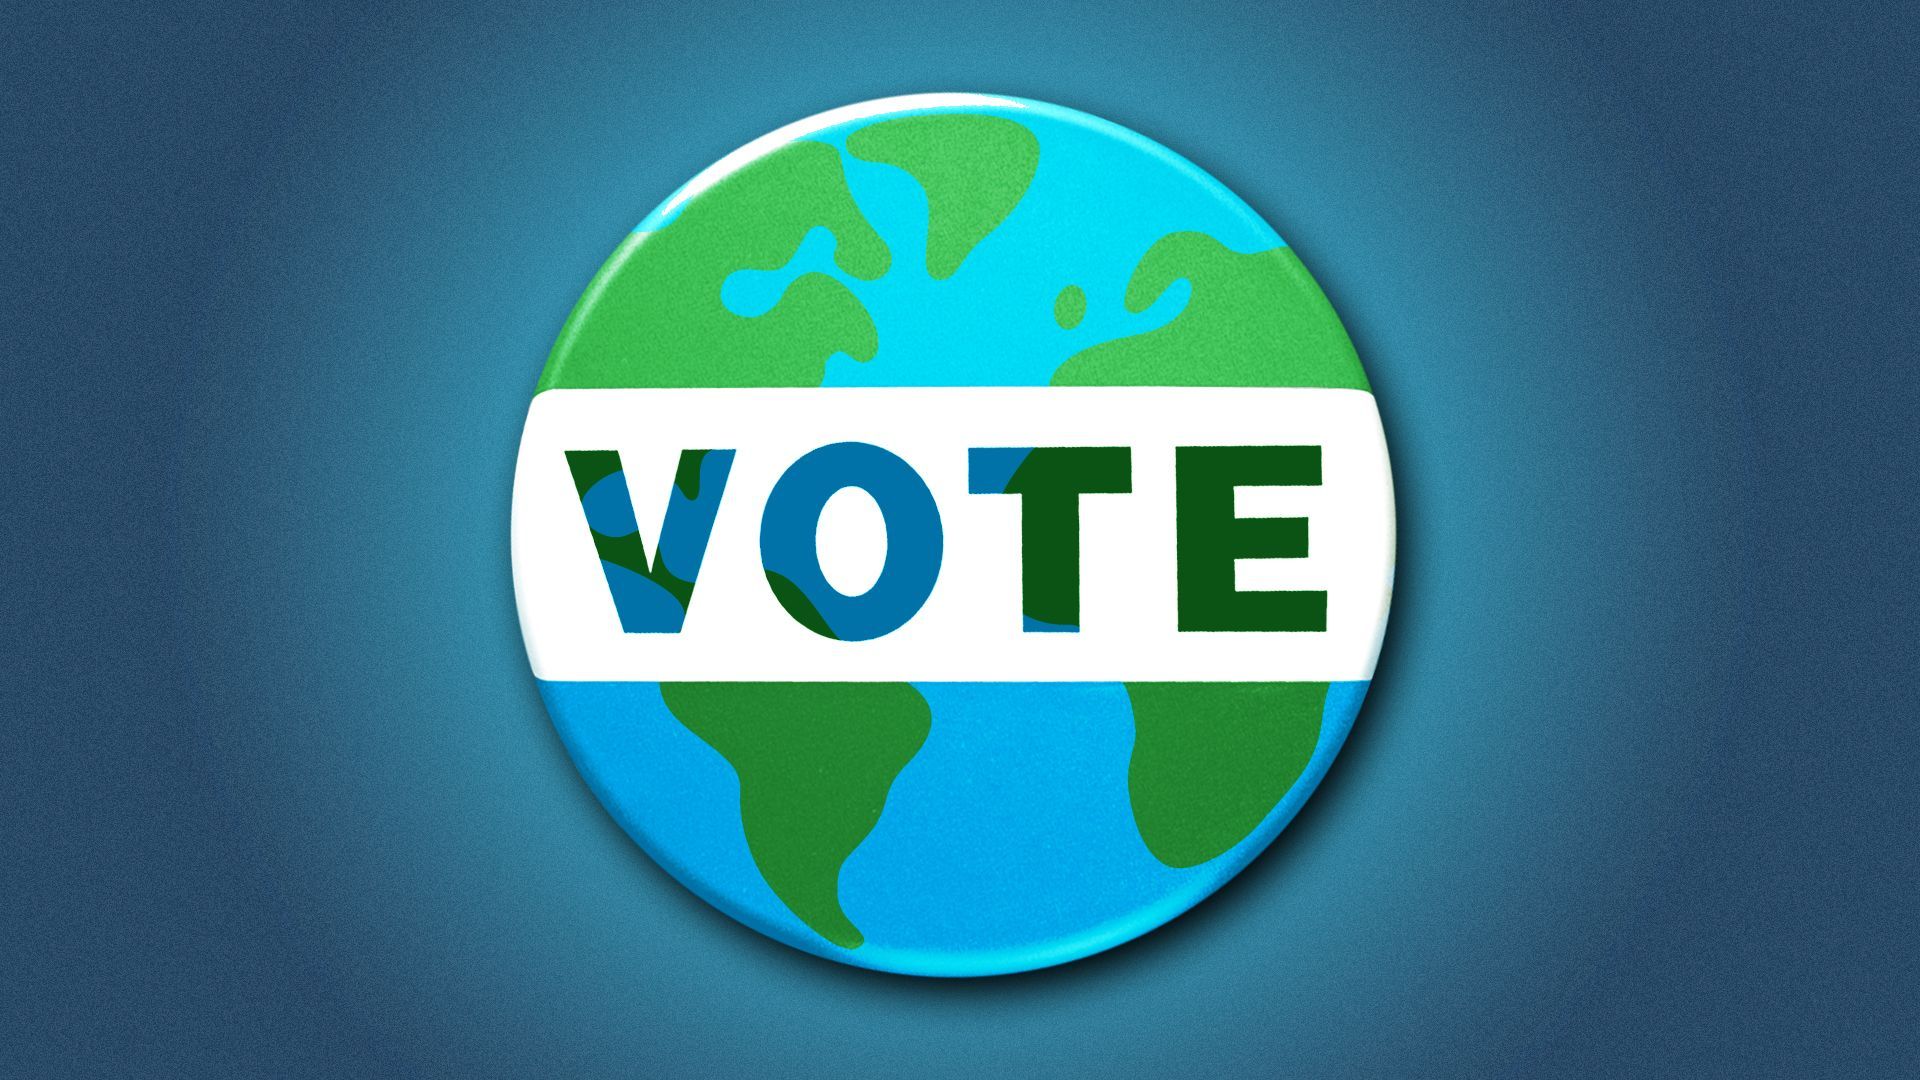 Illustration of a VOTE pin with the red and blue semicircles filled with an Earth image.